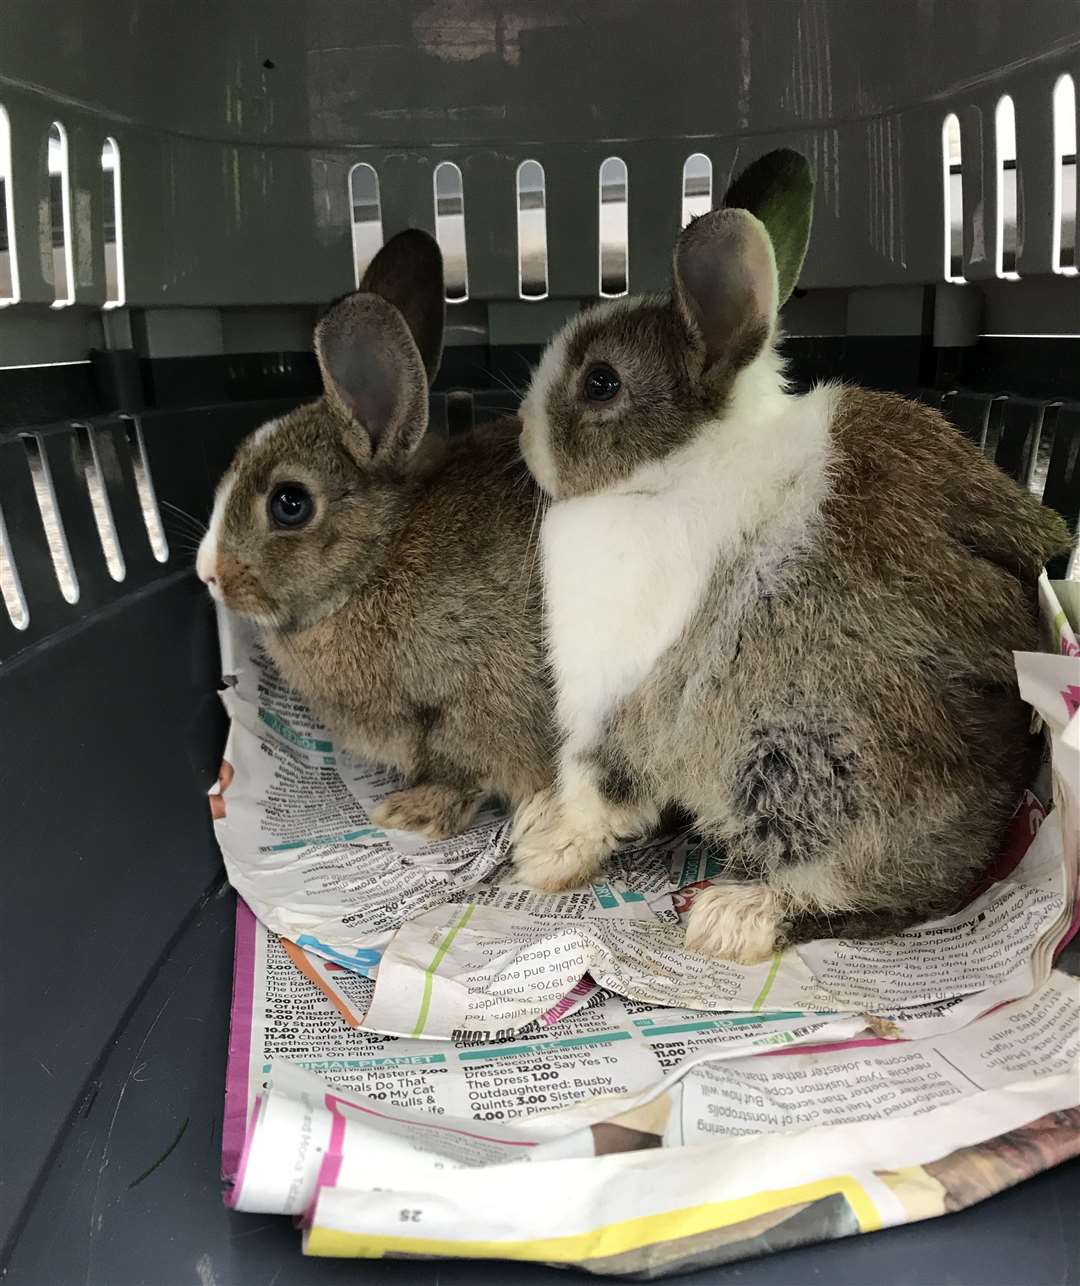 The charity say the rabbits are doing well. Picture: RSPCA